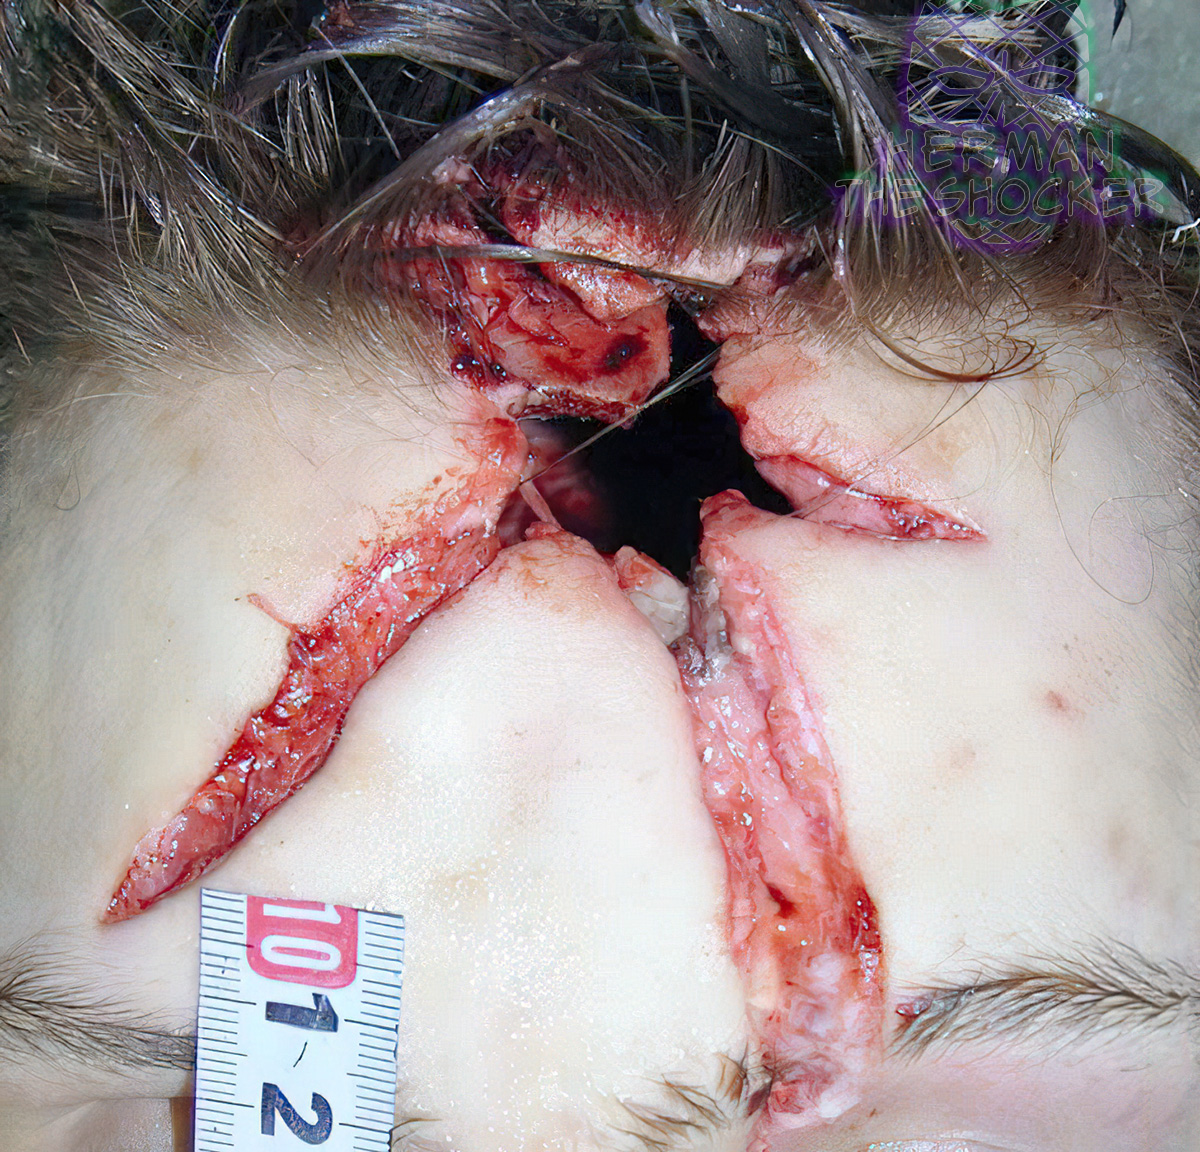 Gunshot entrance wound on the forehead